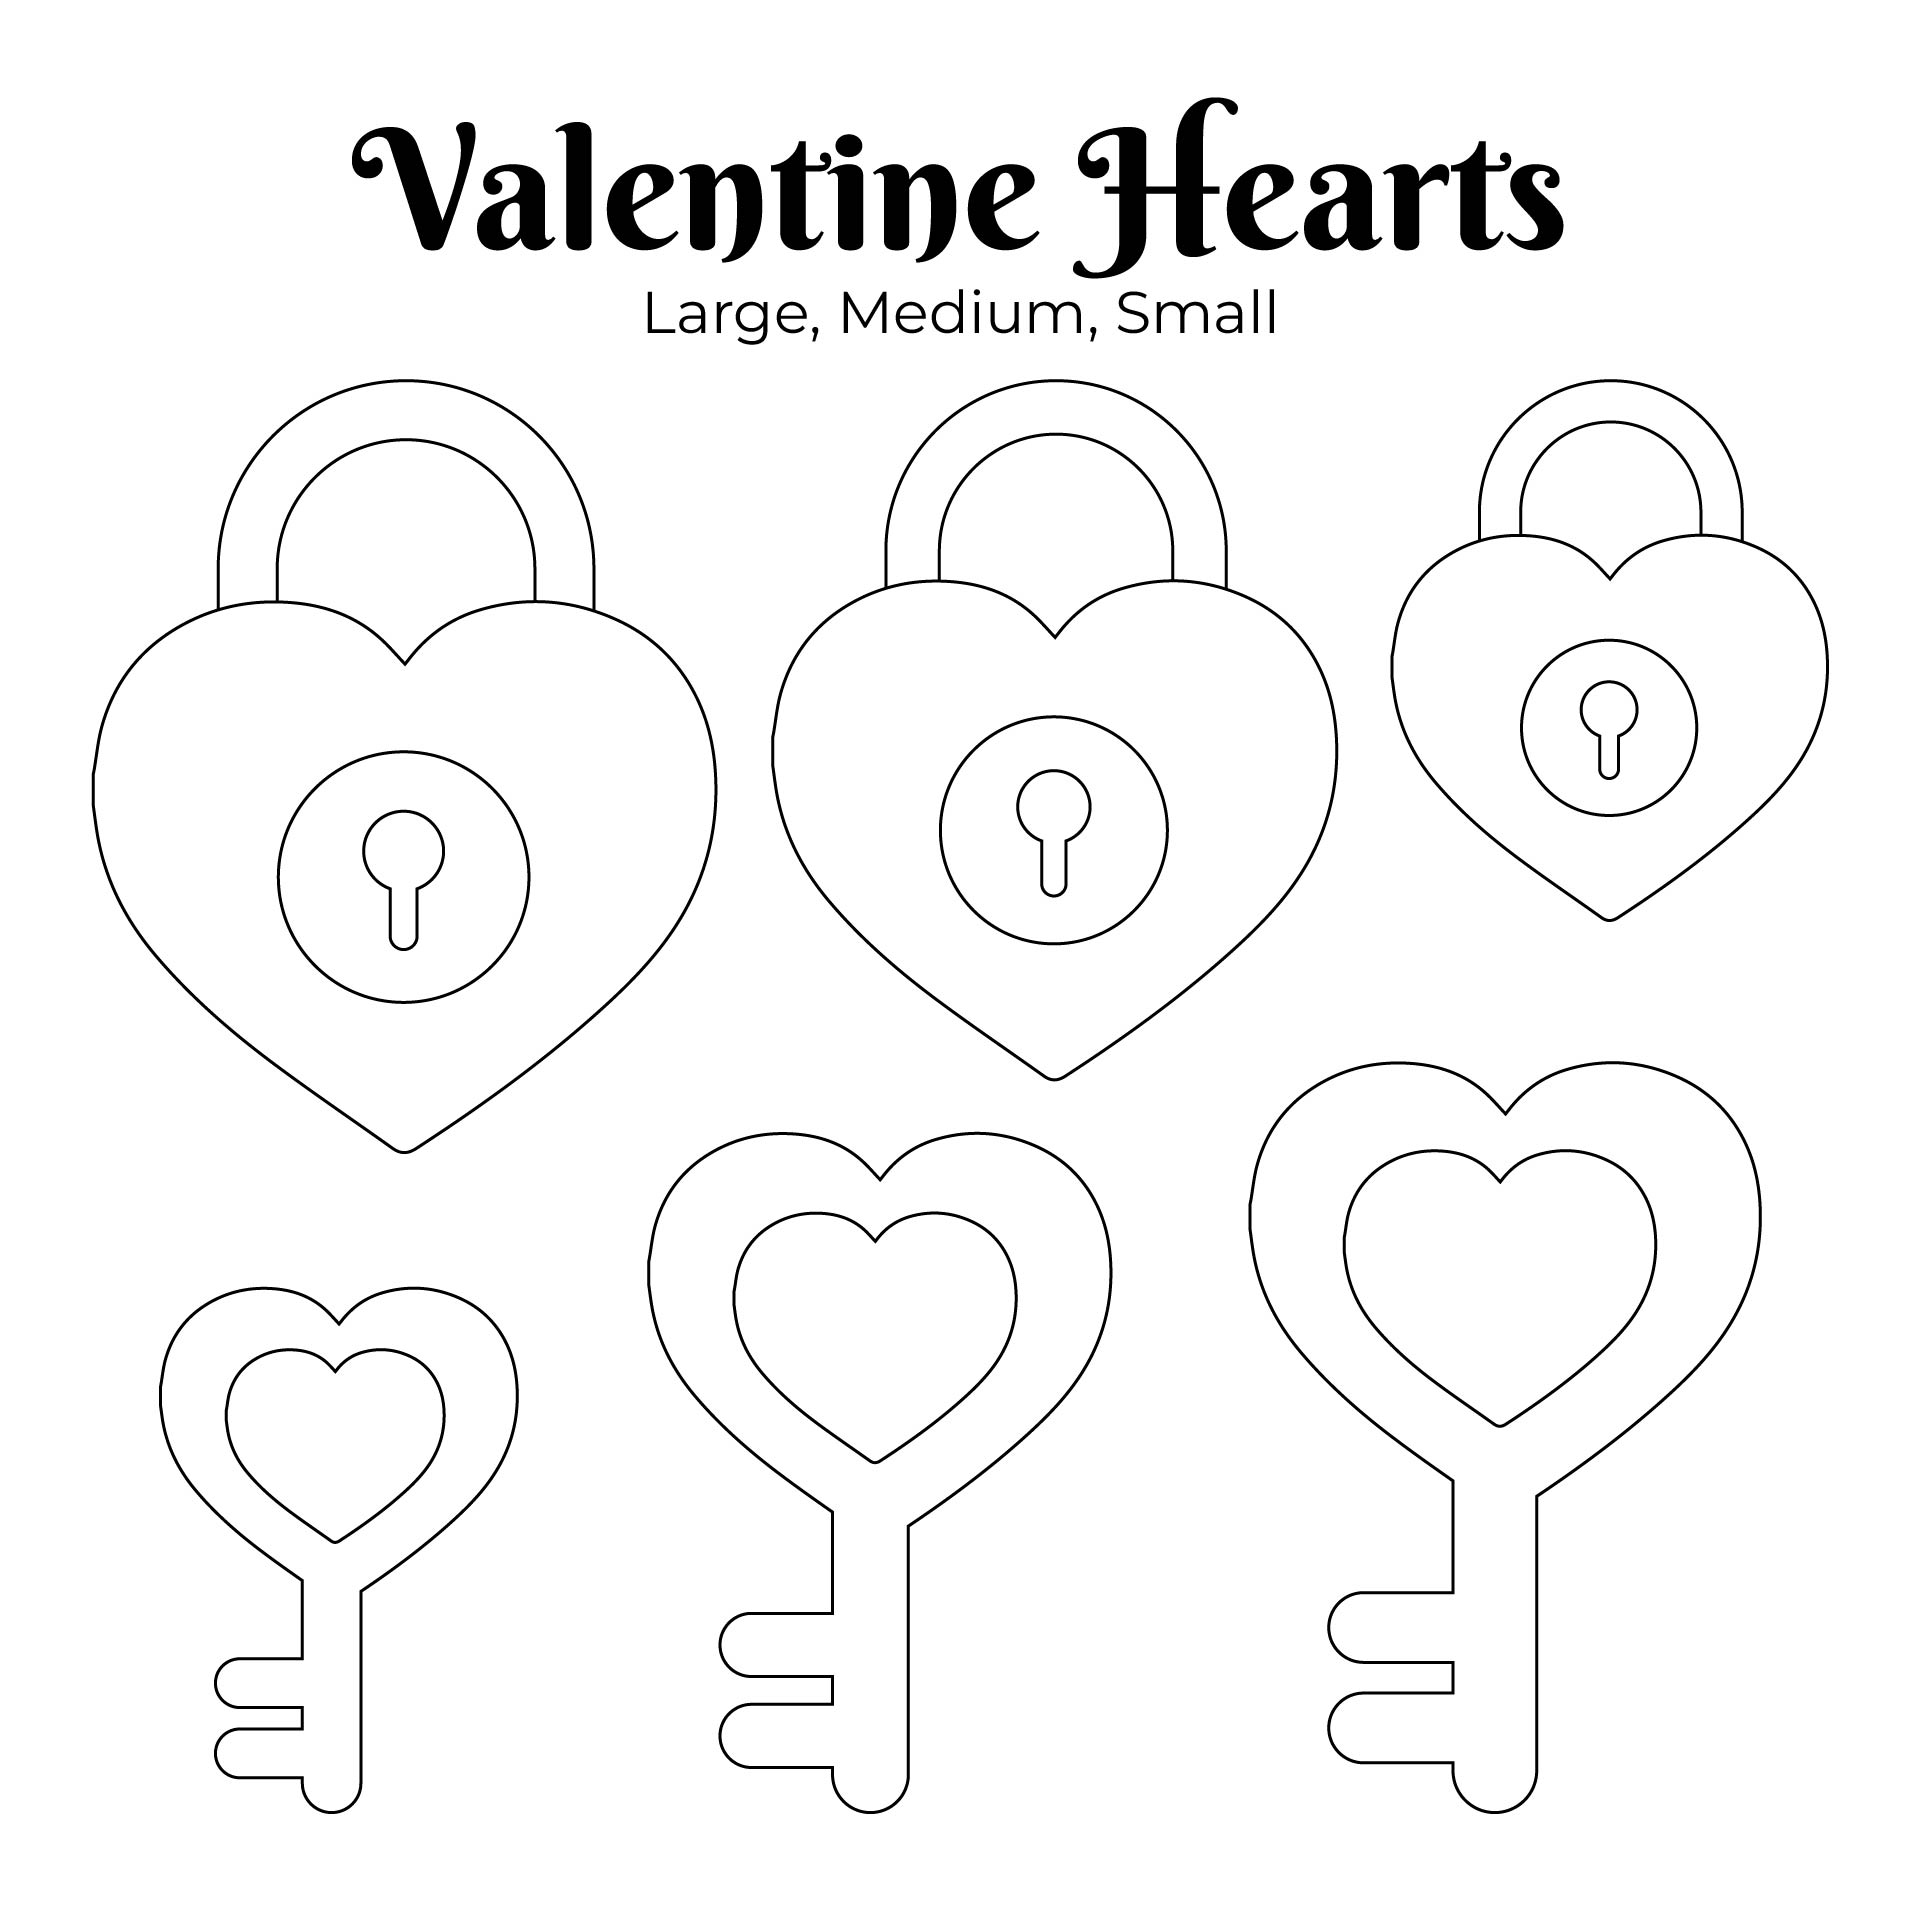 4 Best Images of Heart Template Printable Different Sizes Free